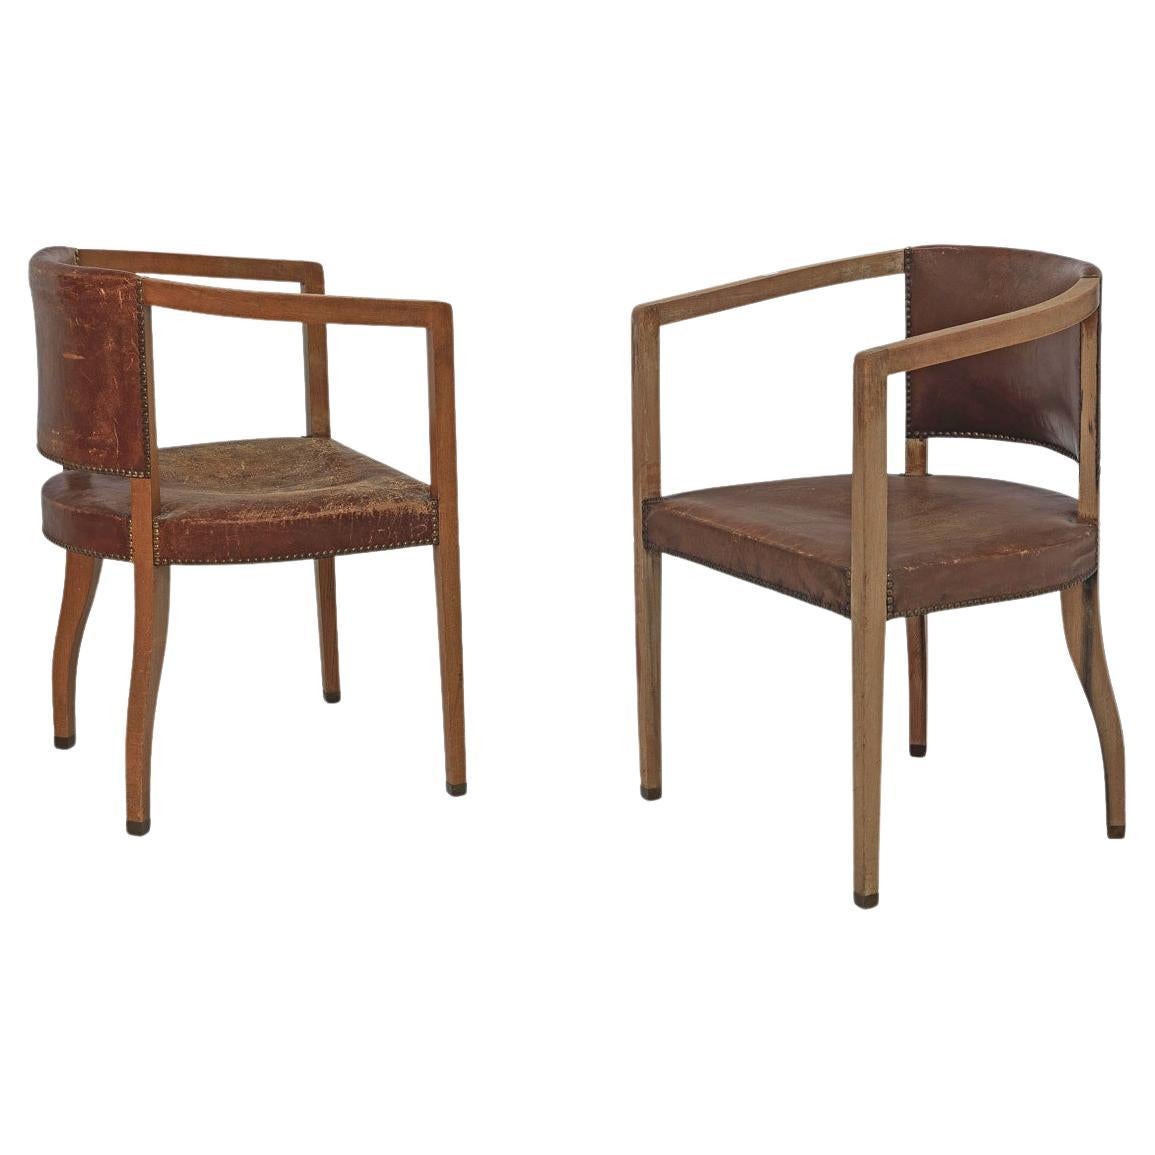 Original Pair of Carl Witzmann Chairs House Bergmann Jugendstil Secession Style For Sale